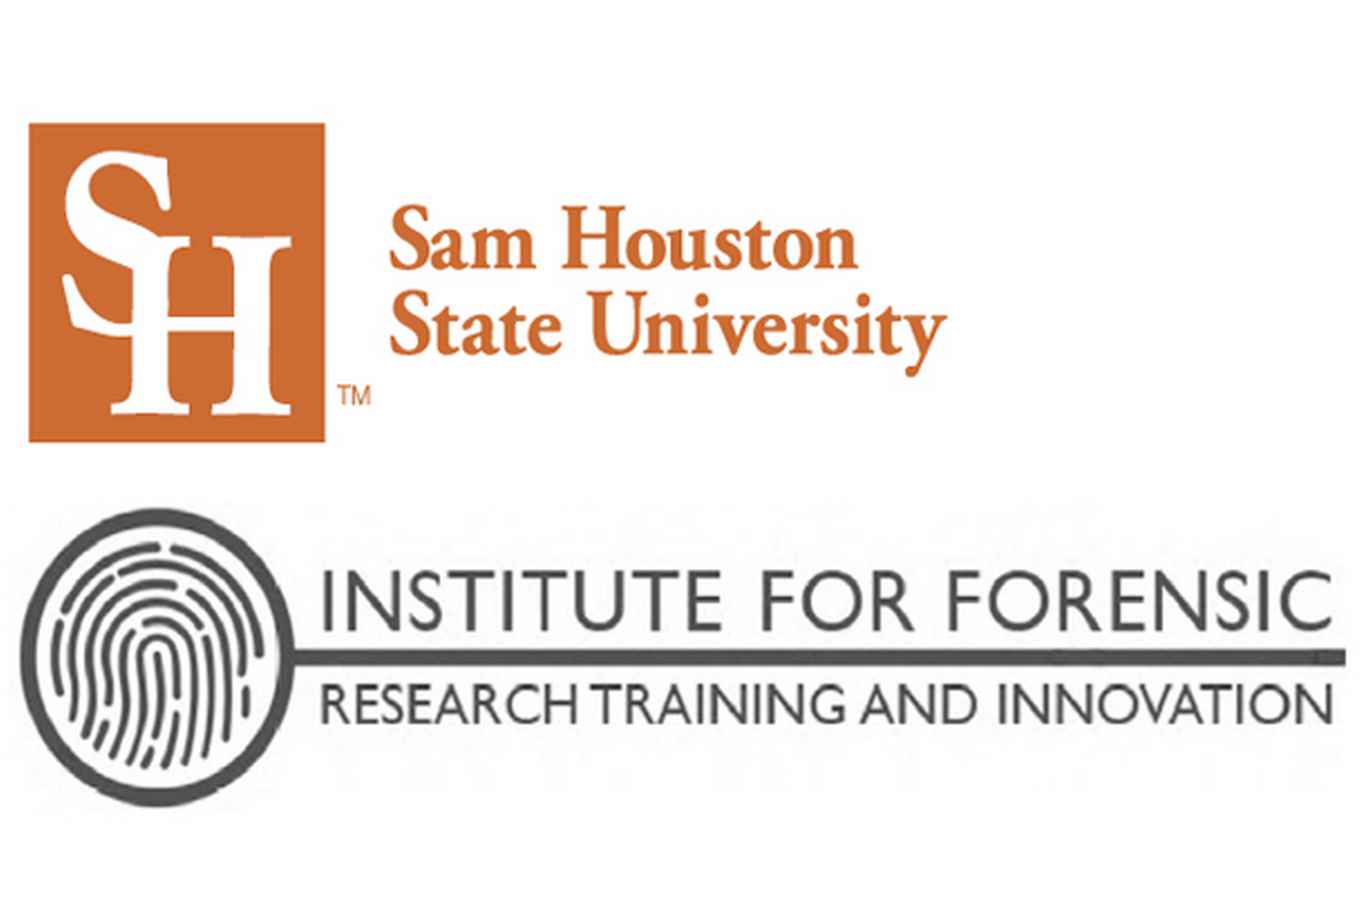 Institute for Forensic Research Training and Innovation (IFRTI)